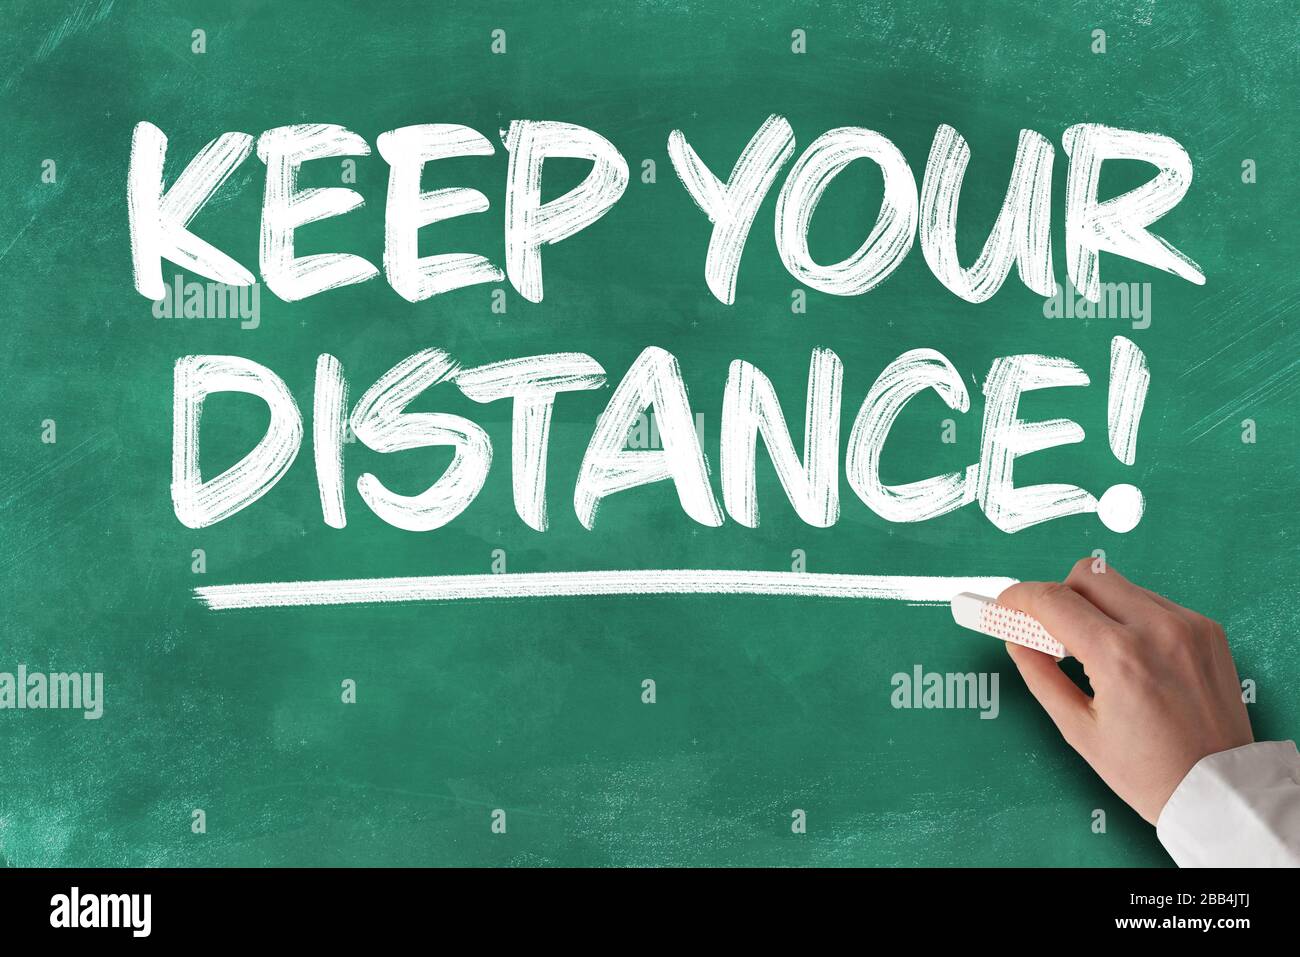 text KEEP YOUR DISTANCE written on green chalkboard, social distancing concept during covid-19 coronavirus pandemic Stock Photo